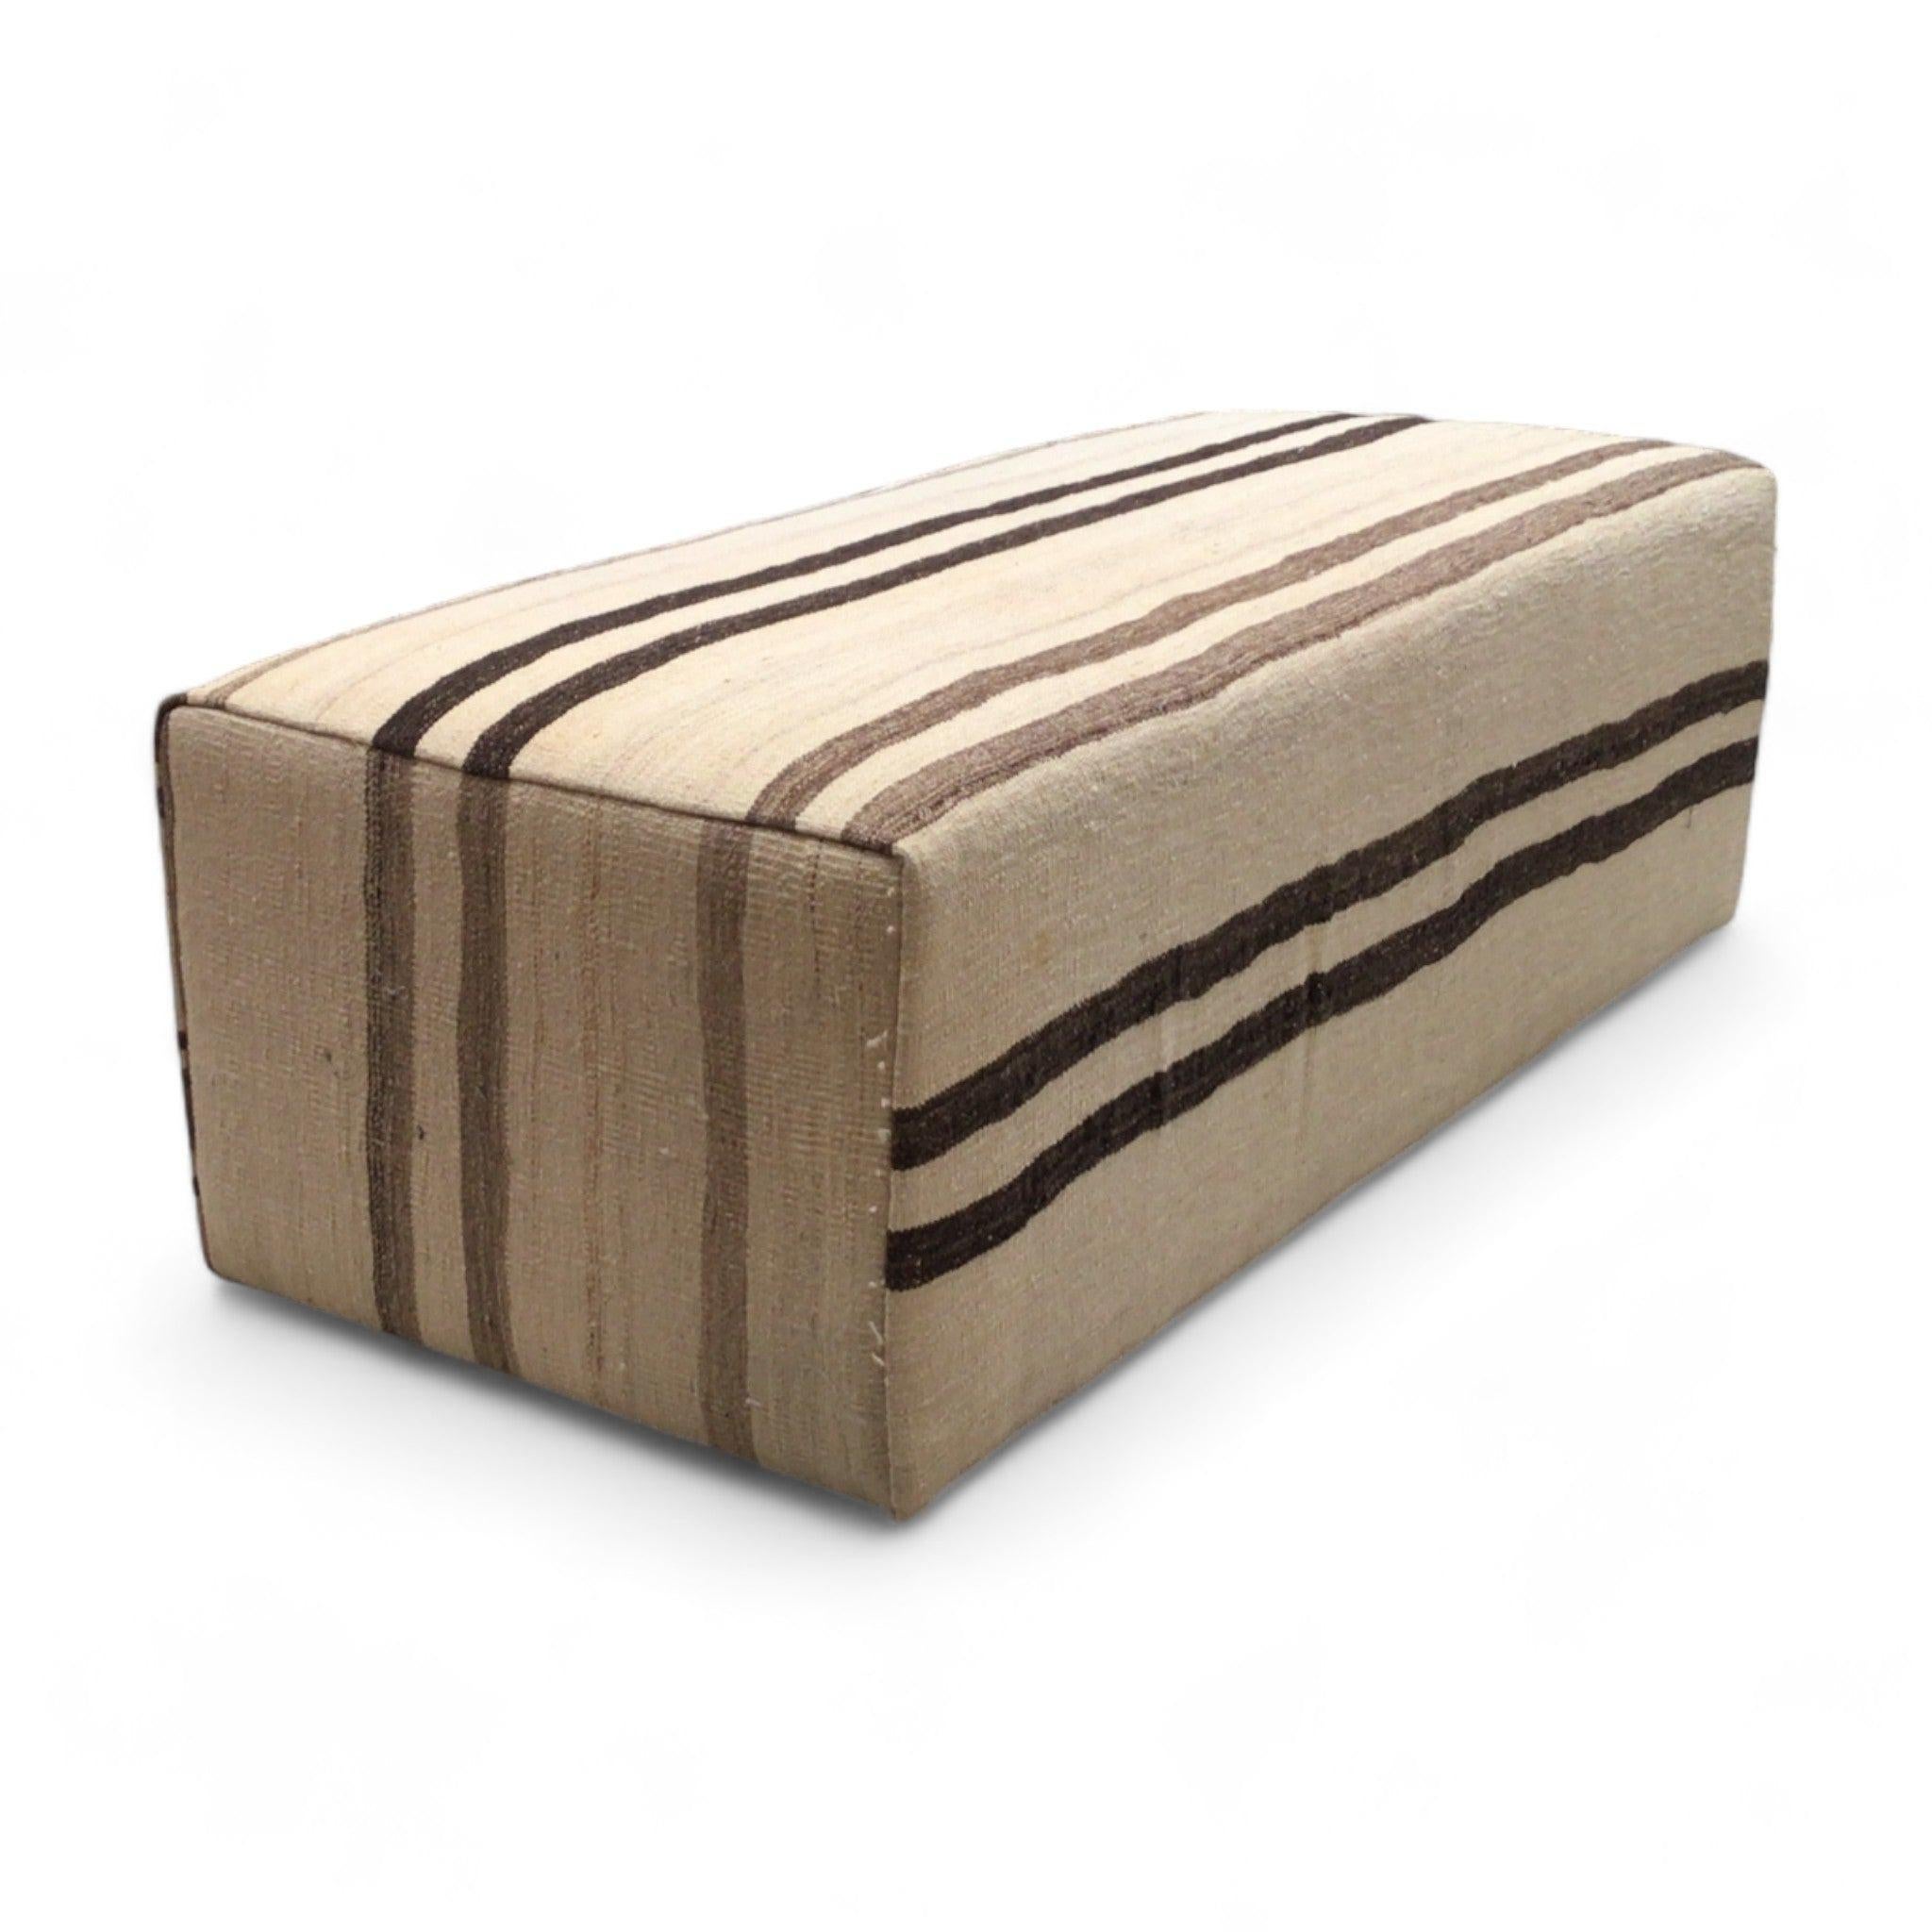 Rich striped ottoman was newly made with a deconstructed vintage rug. The grandiose scale makes a great statement in a room and is a unique option for a coffee table. Perfect addition to a cosy, liveable space.